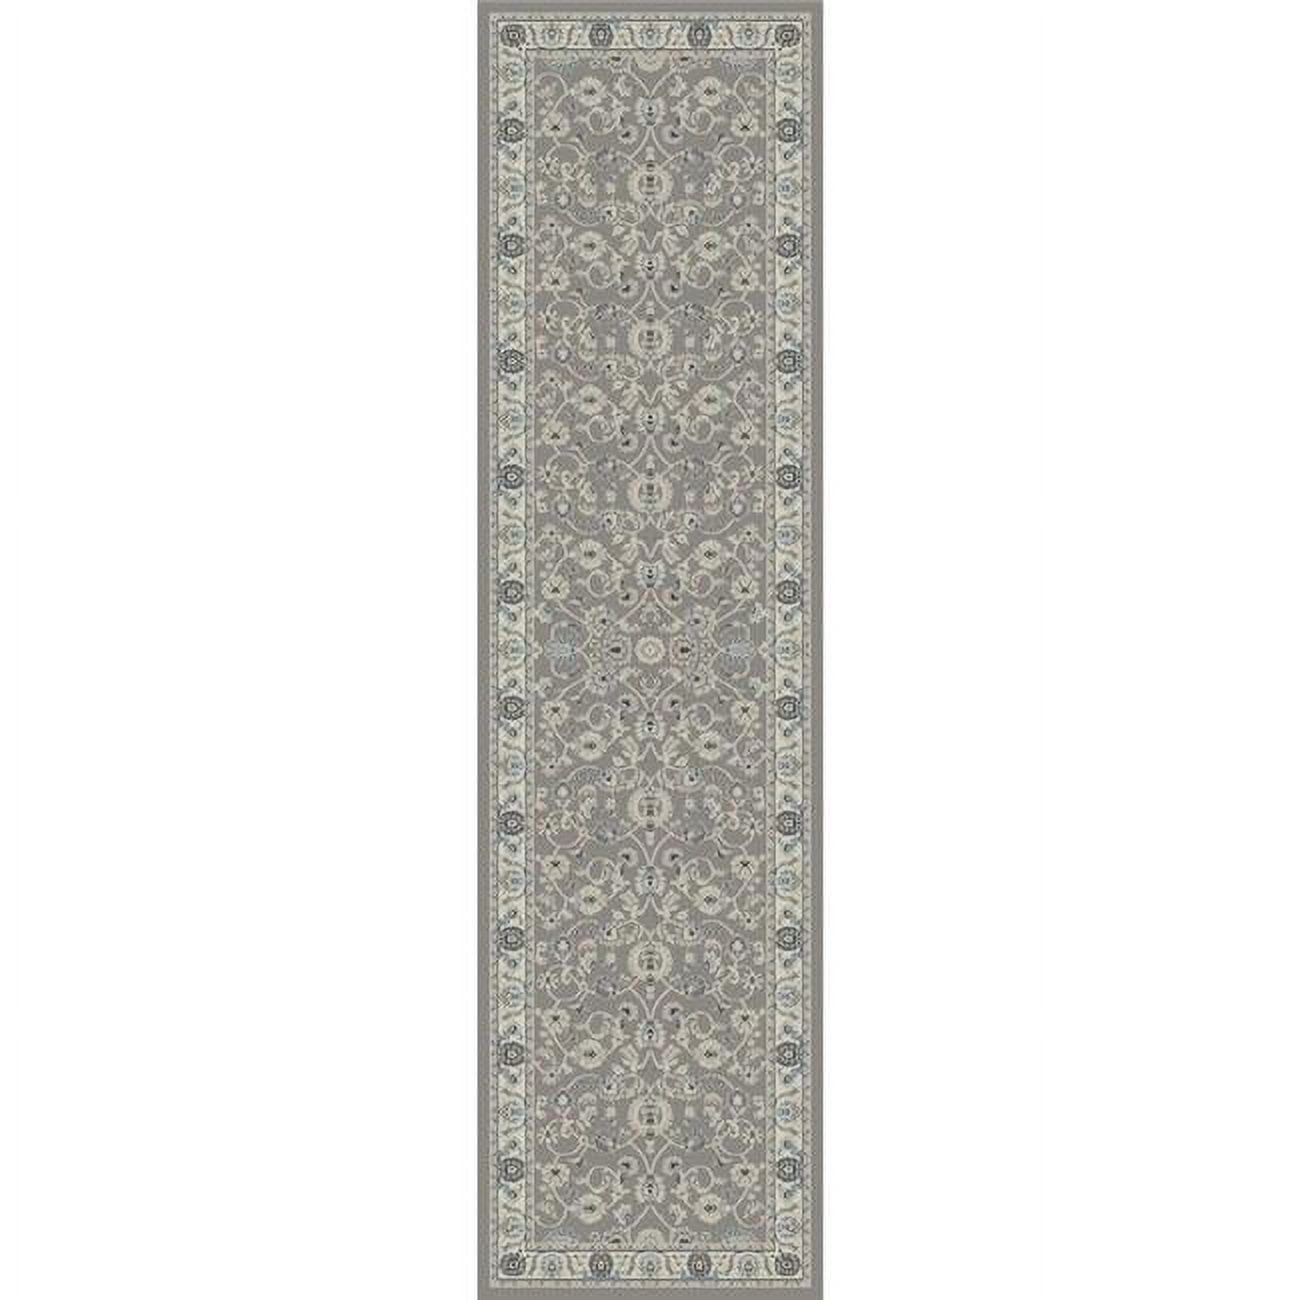 Picture of Concord Global 28162 2 ft. x 7 ft. 3 in. Kashan Bergama - Grey